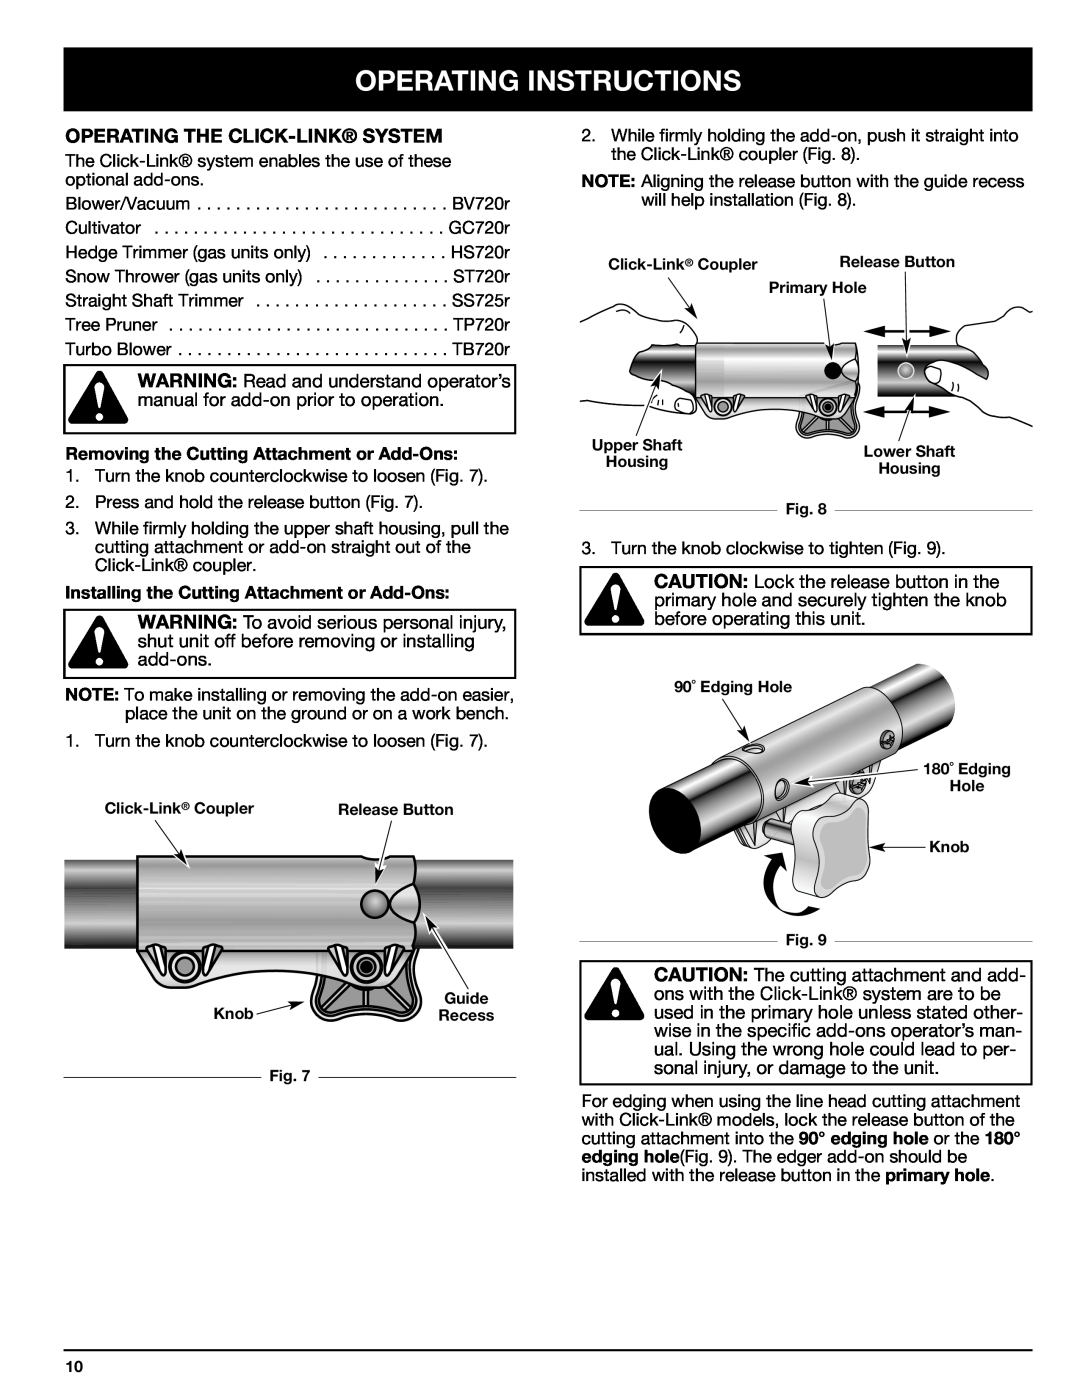 Ryobi 130rEB manual Operating Instructions, Operating The Click-Link System, Removing the Cutting Attachment or Add-Ons 